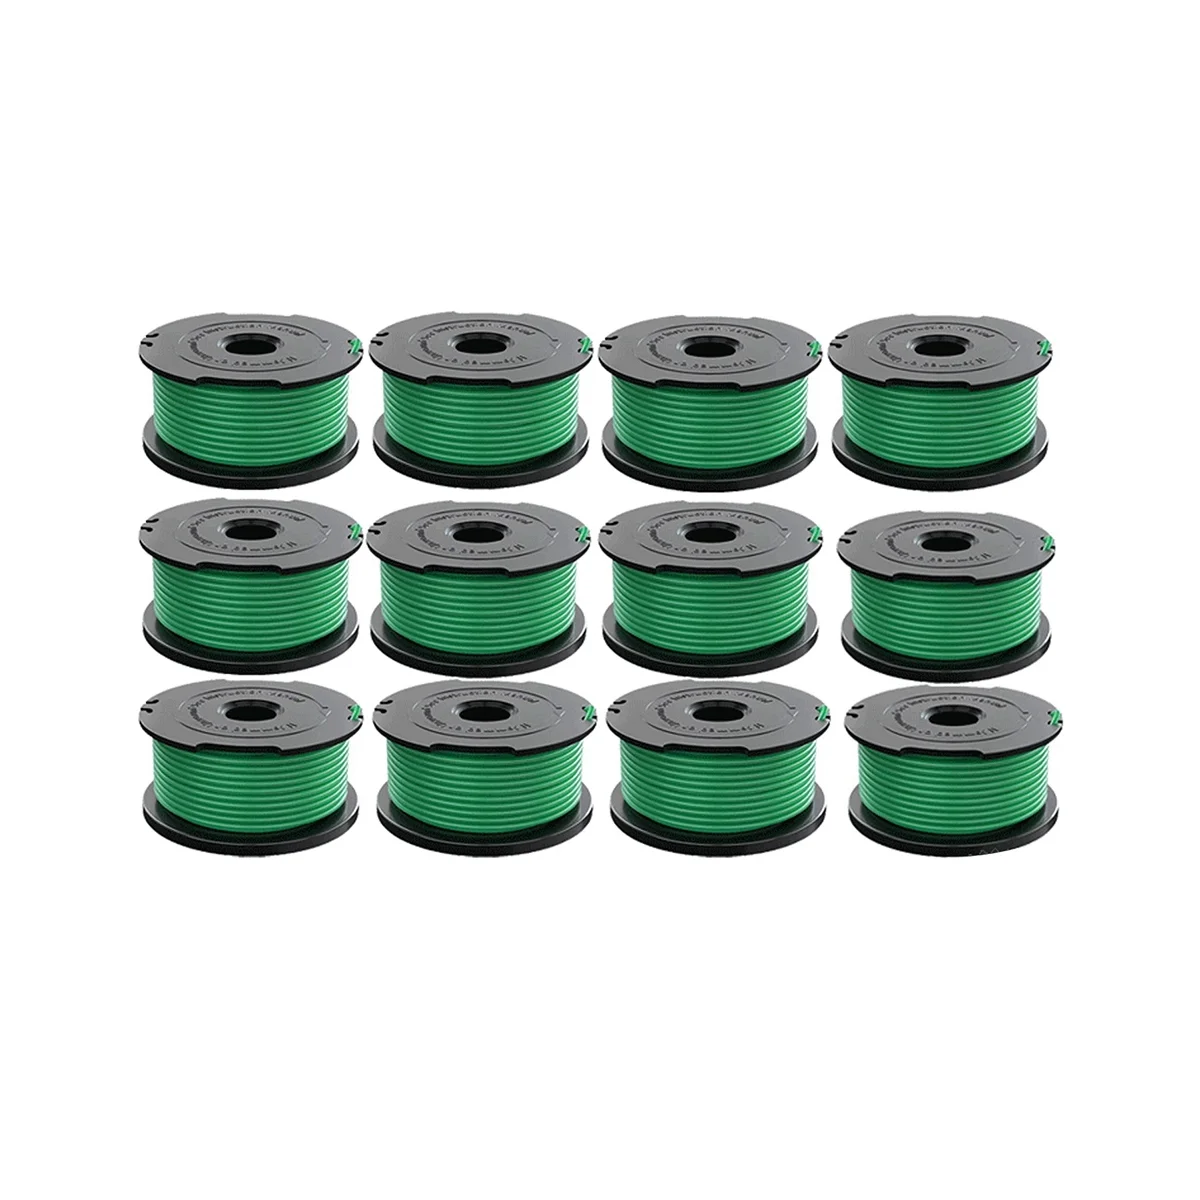 90583594 Replacement Spool Caps Assembly Compatible With For Black+decker  Gh3000 String Trimmer(4 Pack) - Weeders - AliExpress